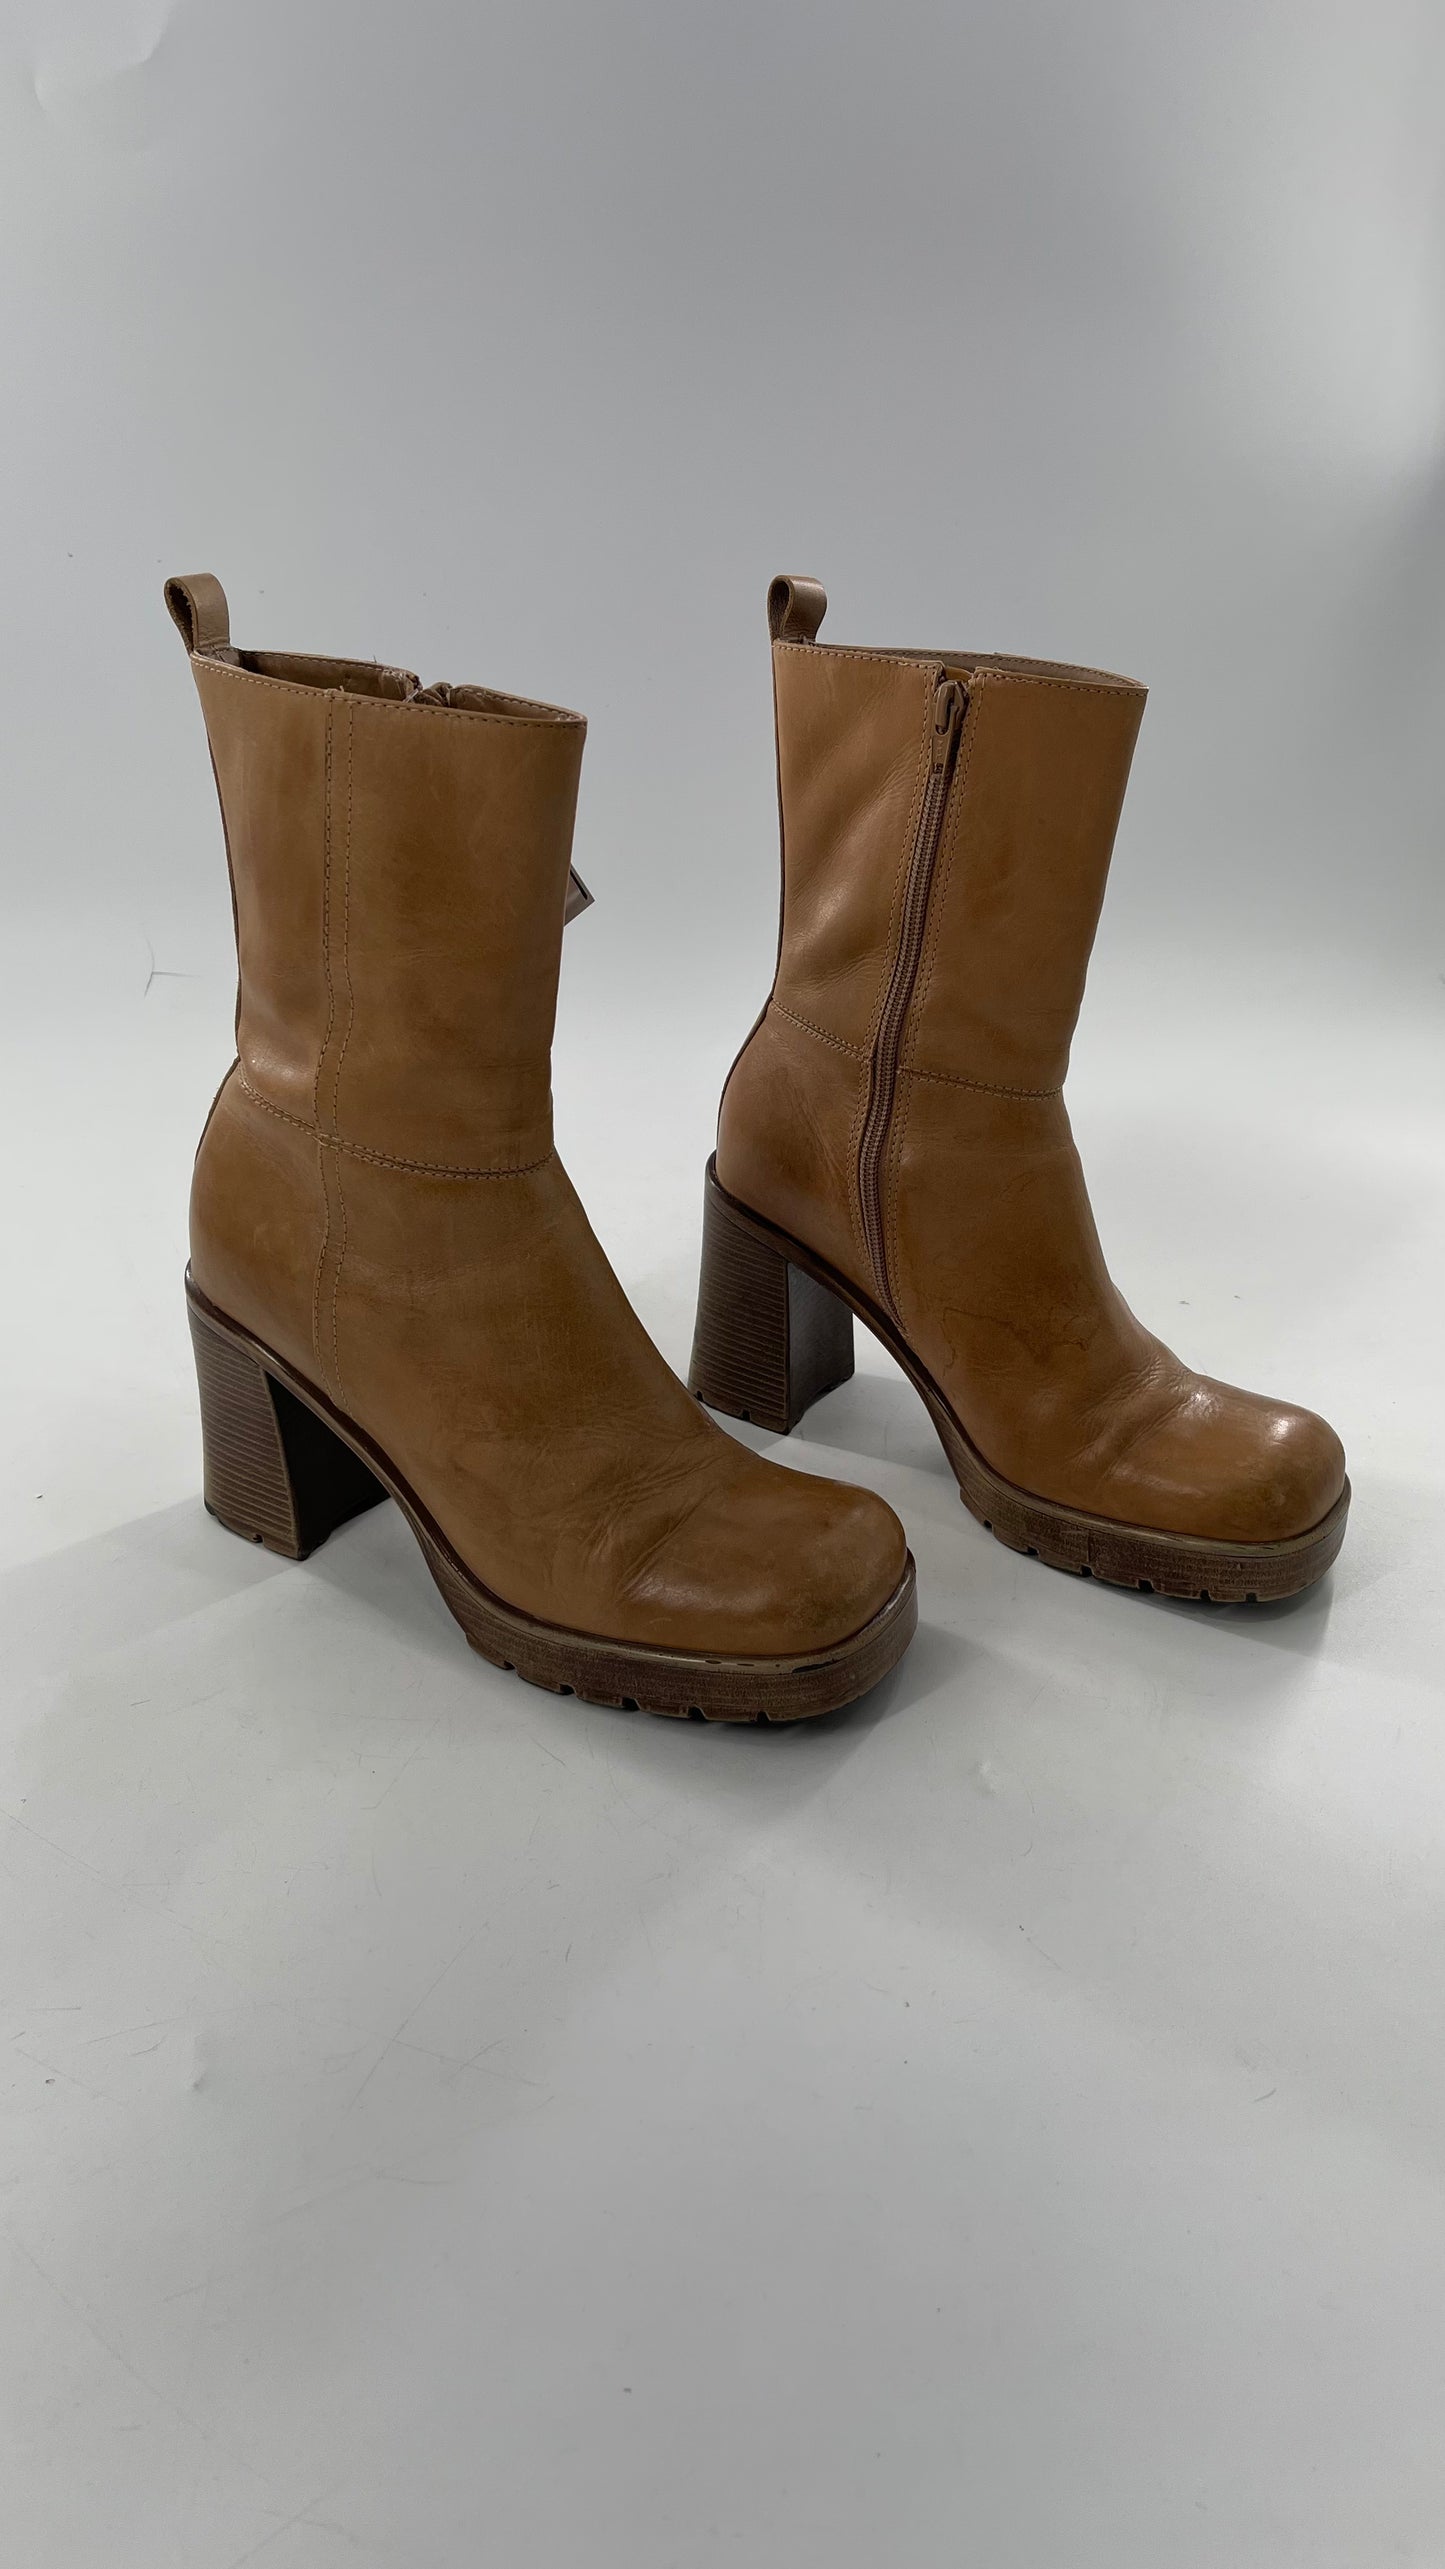 Vintage 90s Steve Madden Tan Leather Funky Square Toe Boot with Platform and Chunky Heel